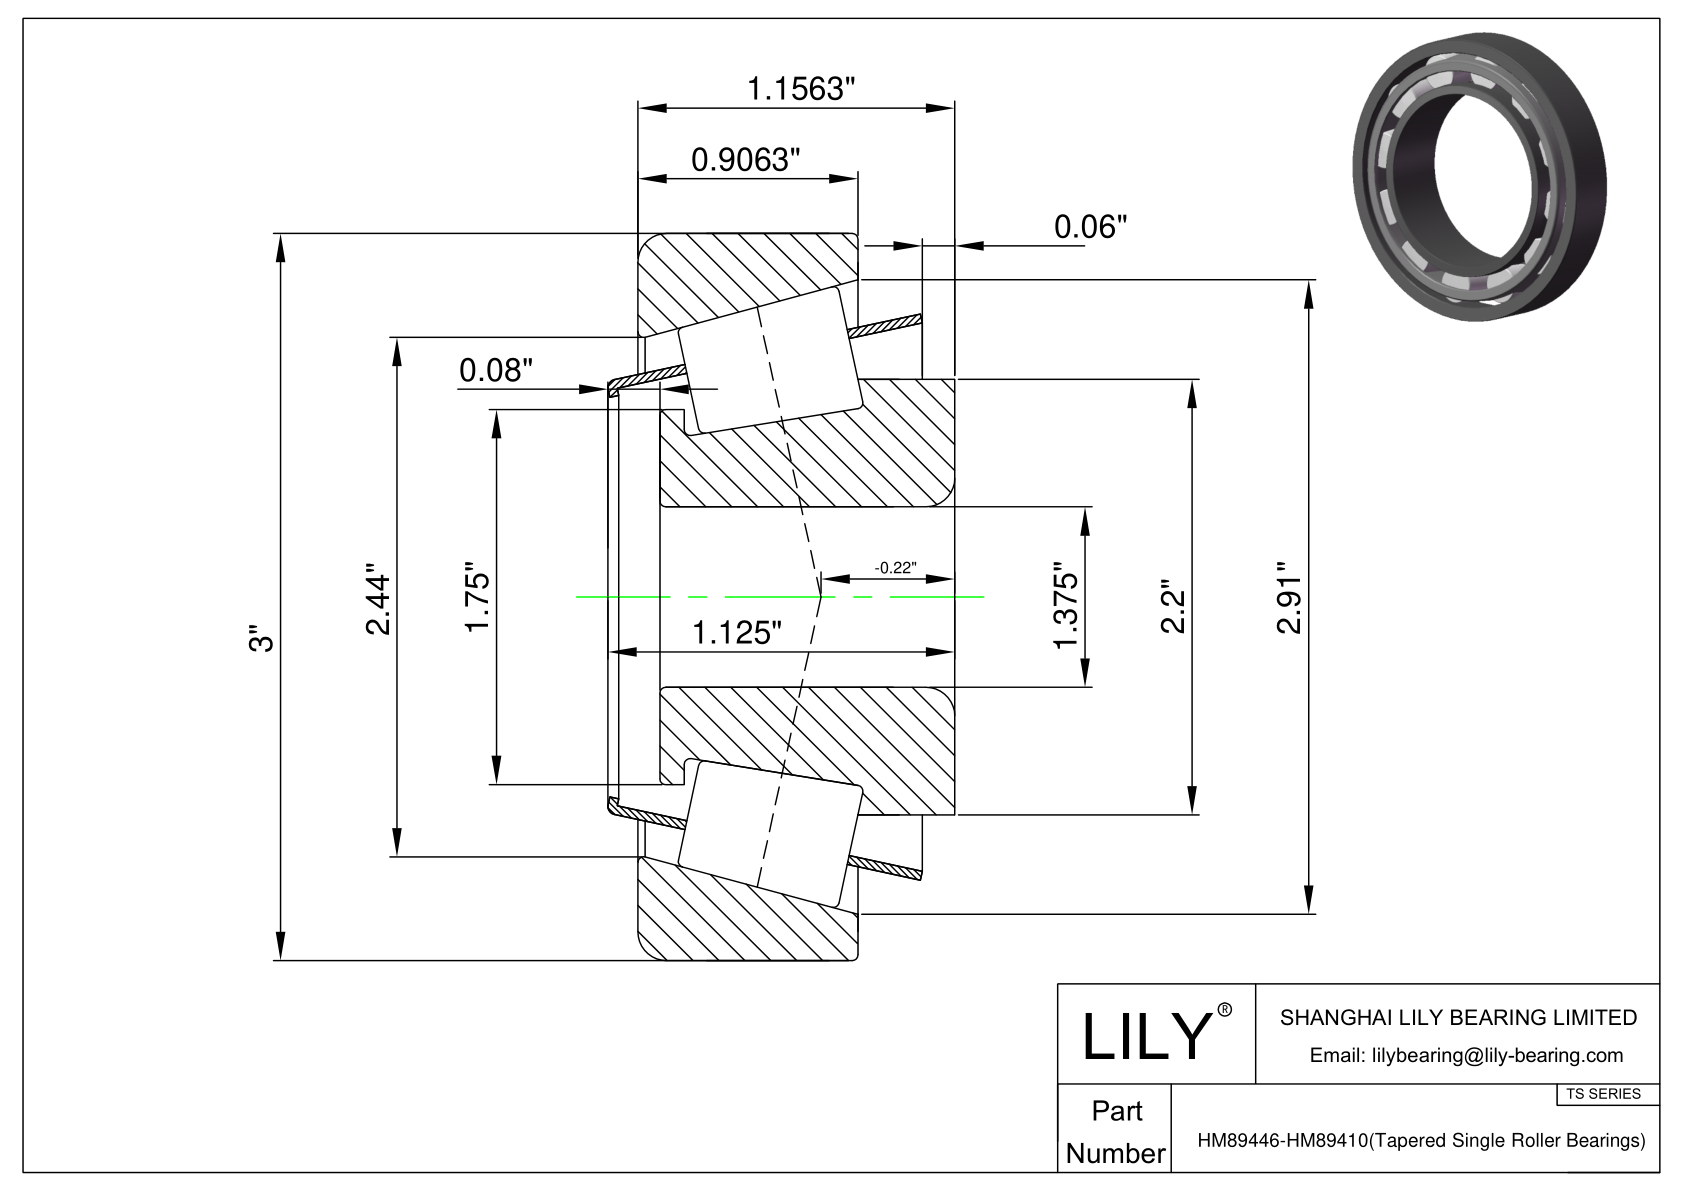 HM89446-HM89410 TS (Tapered Single Roller Bearings) (Imperial) cad drawing